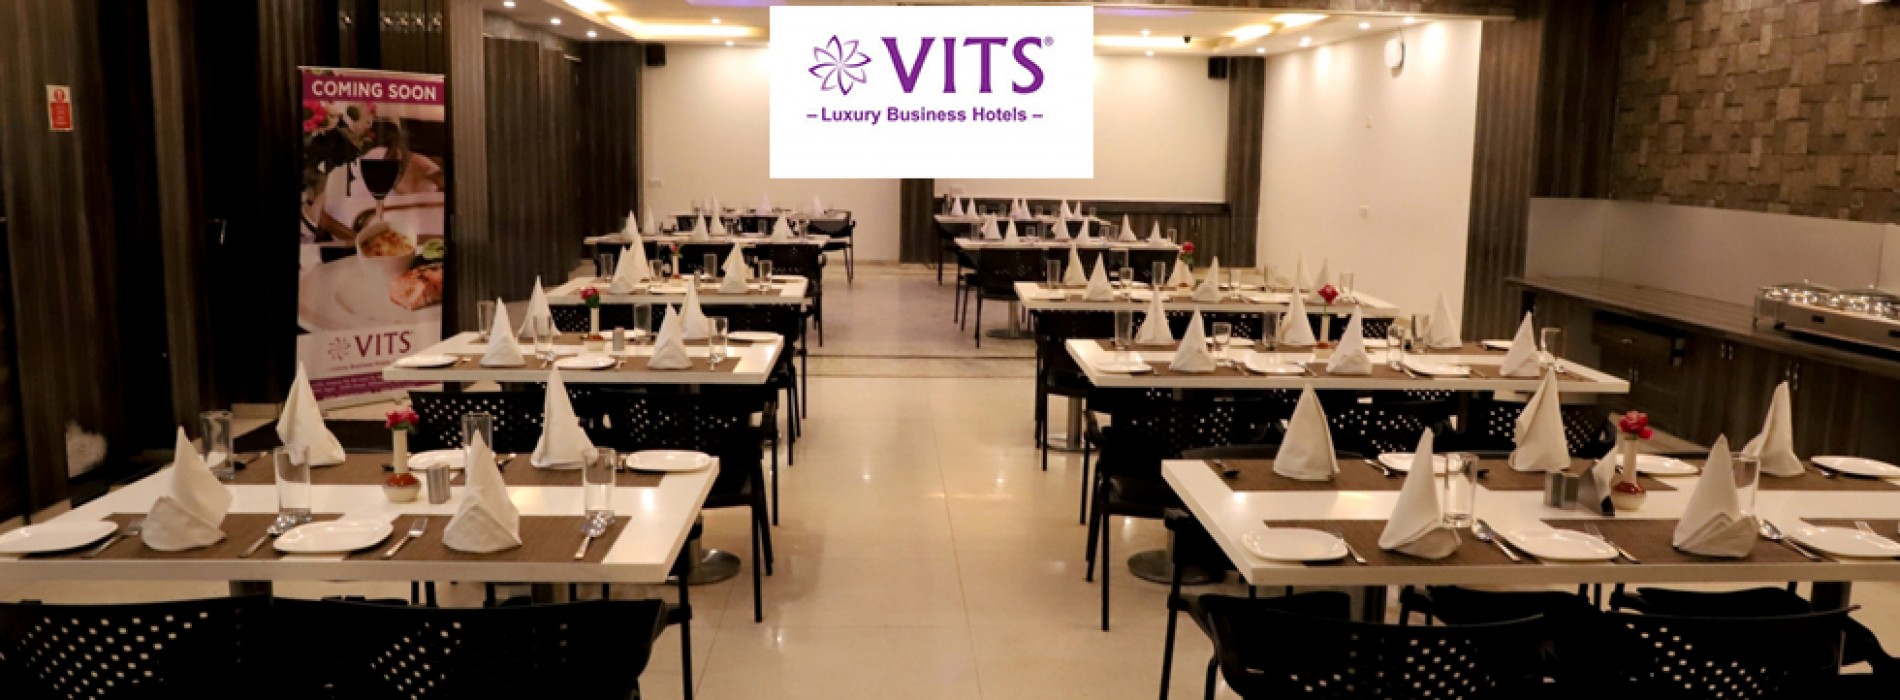 VITS Hotels worldwide marks its debut in the city of Taj with launch of VITS Agra